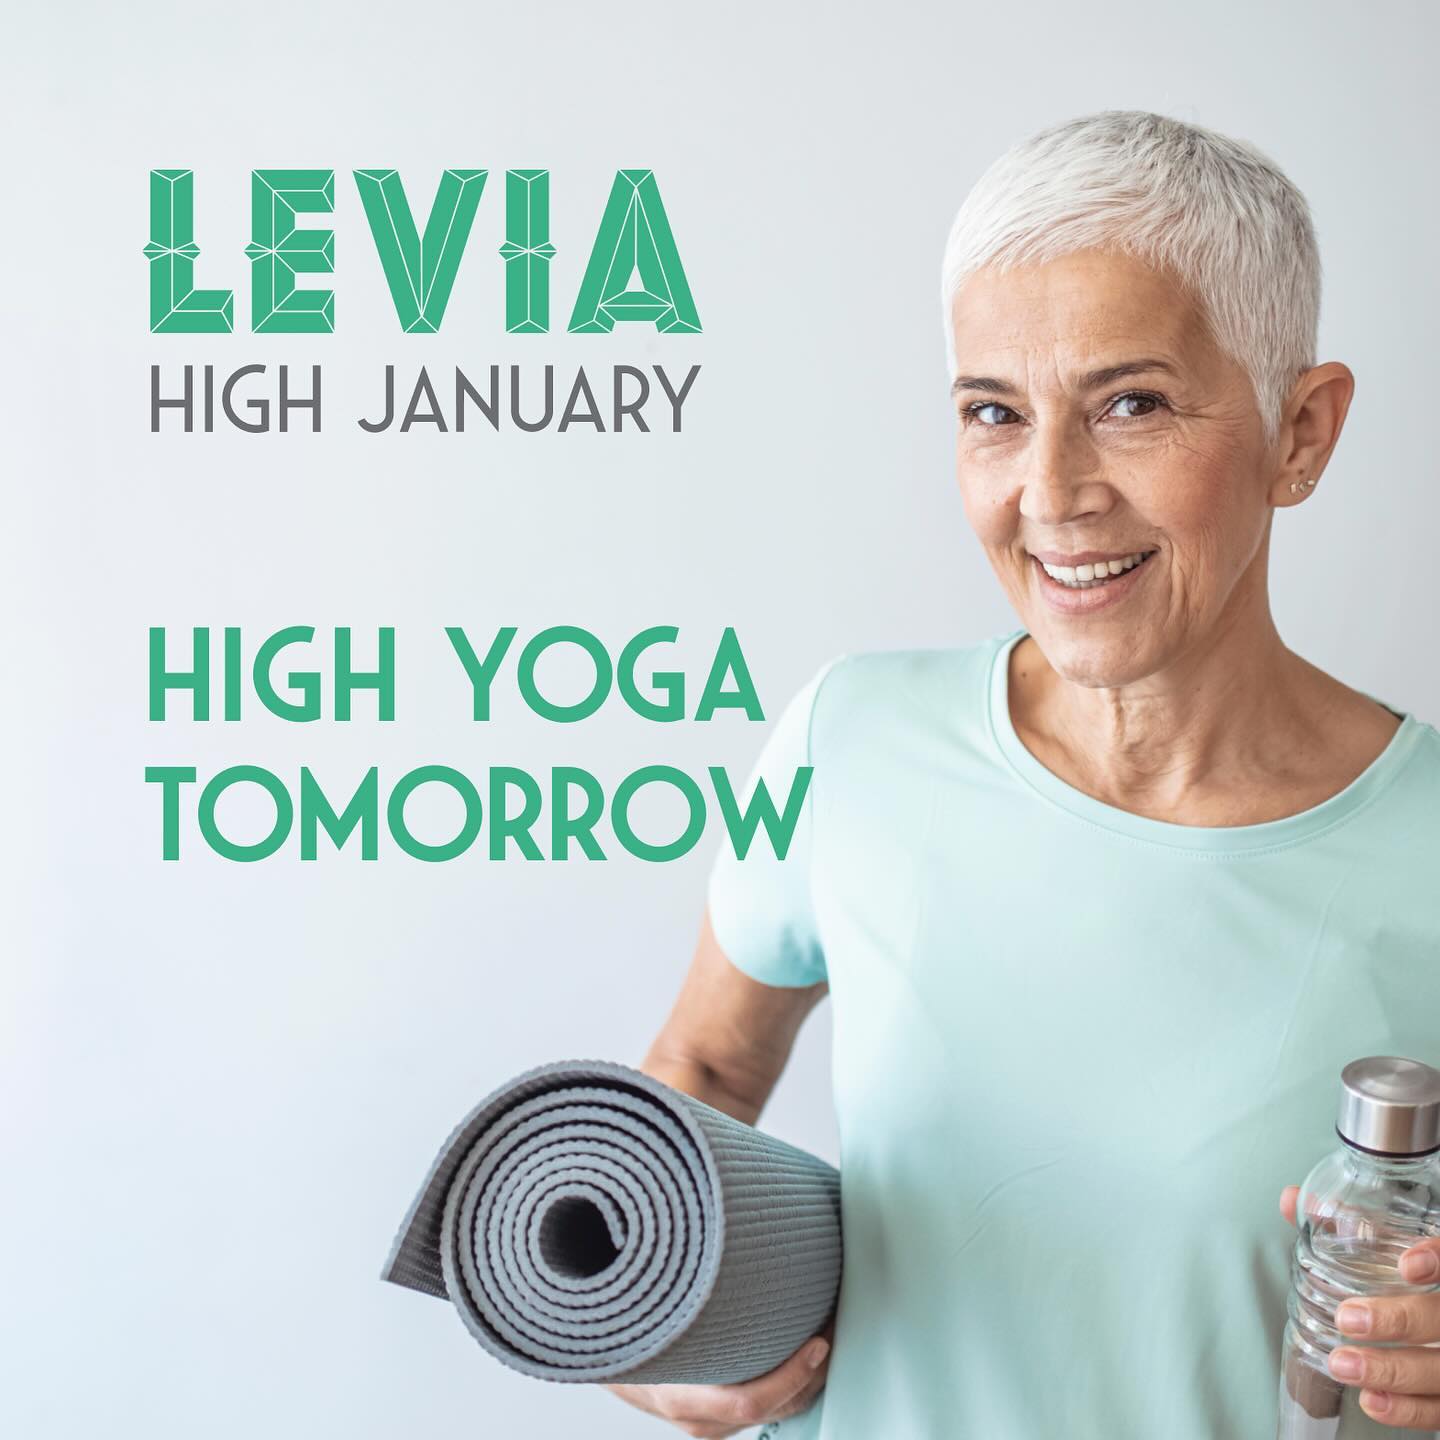 Want to try High Yoga and LEVIA? Here’s your chance! Join us tomorrow in Charlestown for a wellness event sure to jazz up your Dry January. See you there!
Link for tickets! https://www.dinner-at-marys.com/online-store/Canna-Yoga-1-24-Levia-p613373973